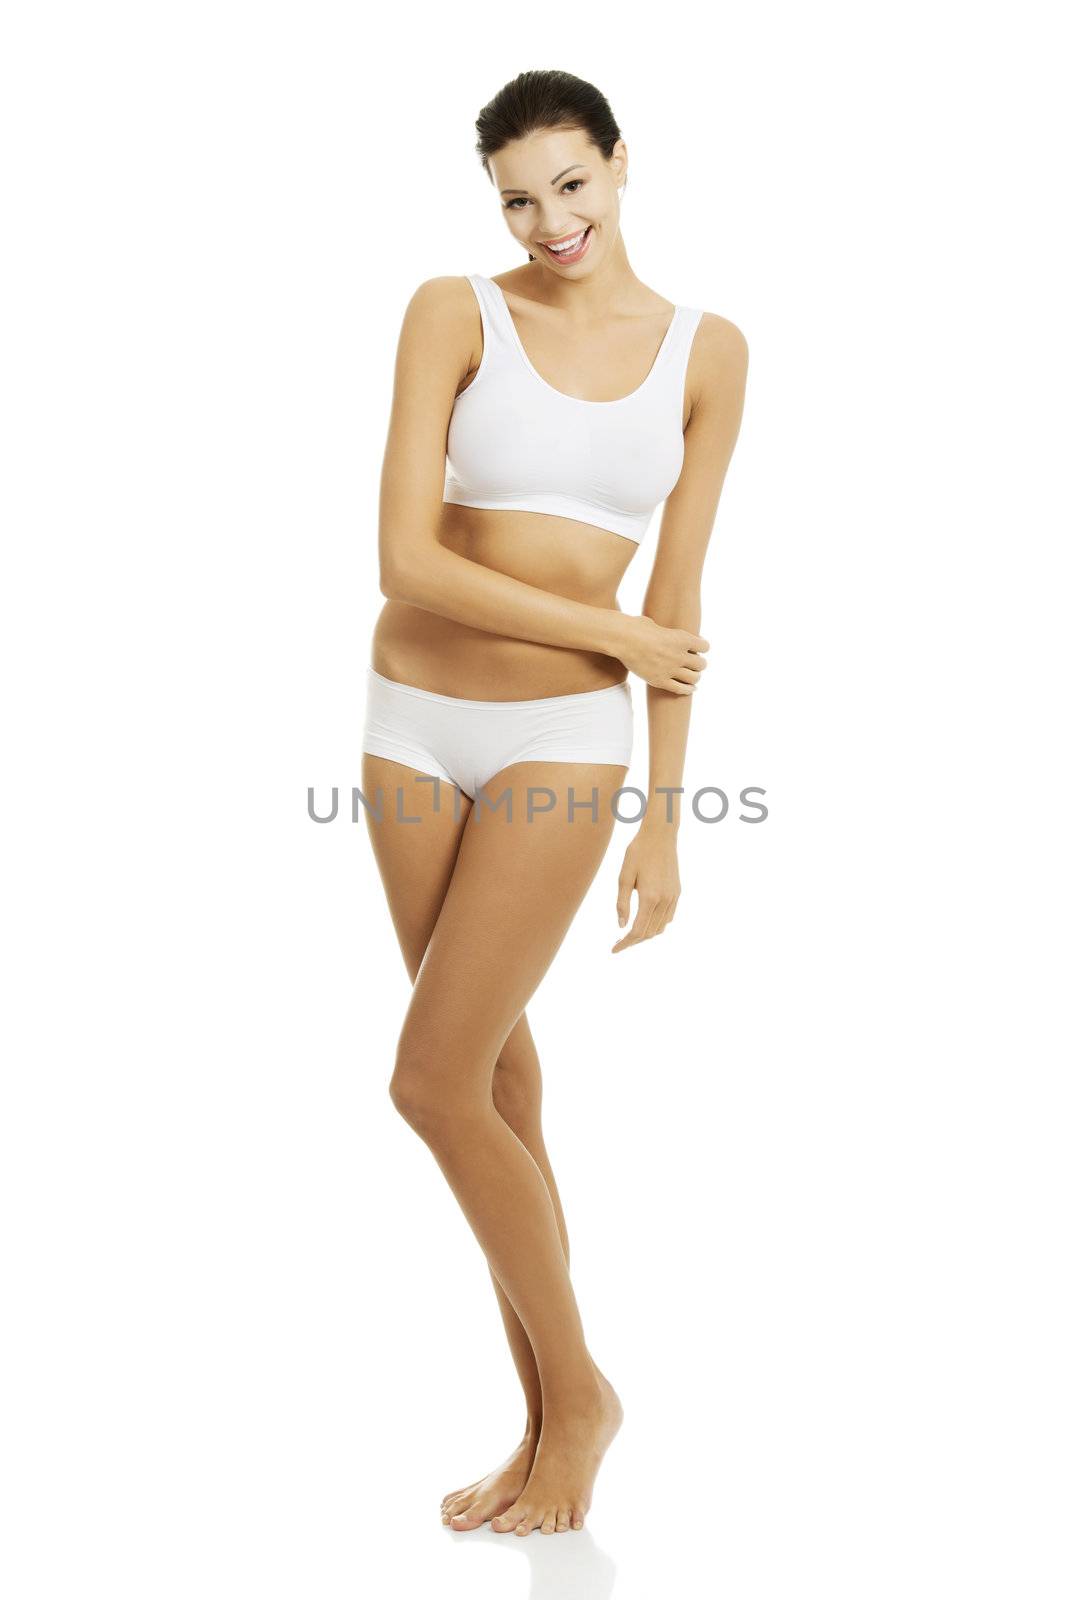 Taned happy fit woman in casual underwear. Diet, healthy lifestyle and body care concept.